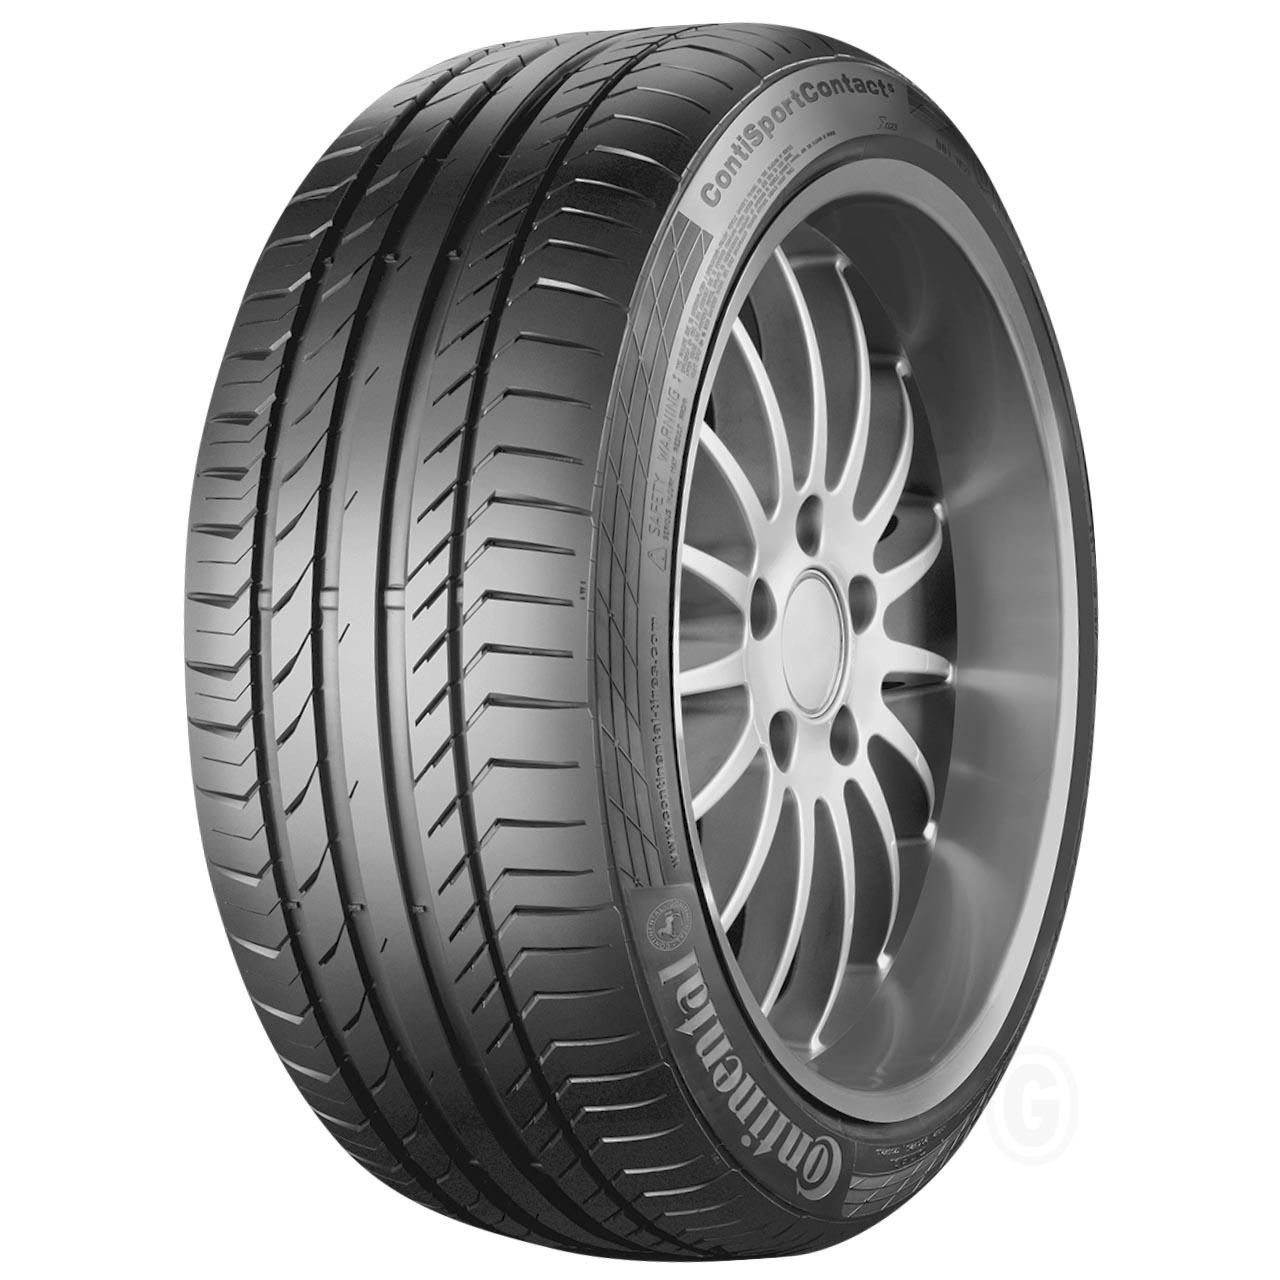 Continental CONTISPORTCONTACT 5 215/50R17 95W XL FR FOR